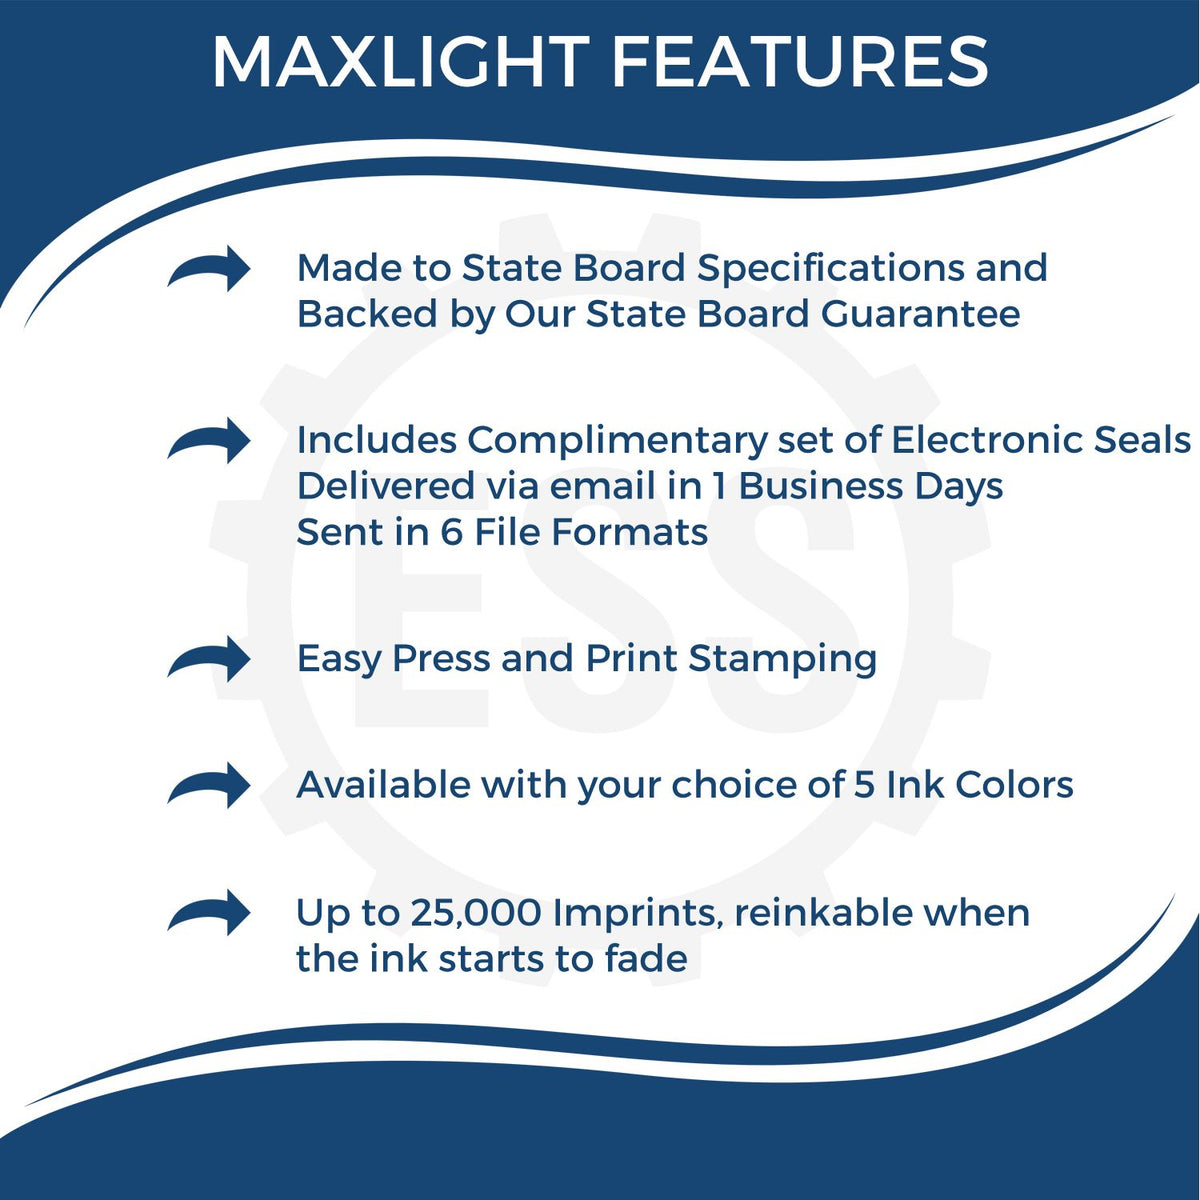 A picture of an infographic highlighting the selling points for the Premium MaxLight Pre-Inked Kentucky Landscape Architectural Stamp